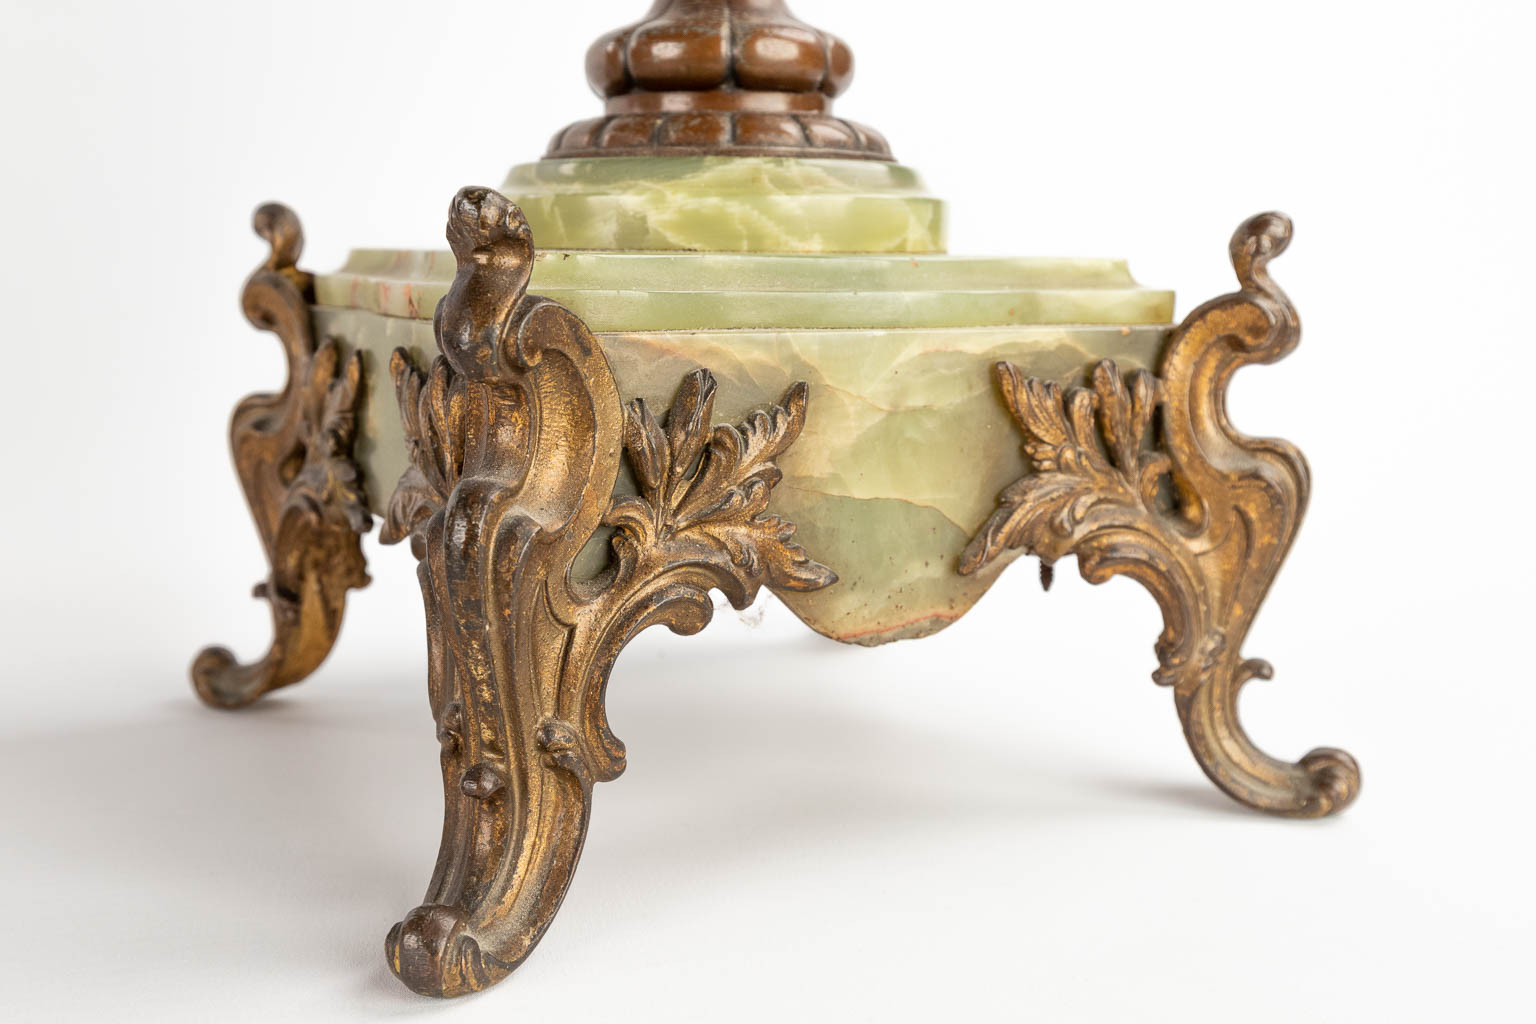 A three-piece mantle garniture clock with side pieces, spelter on an onyx base. 19th C. (D:20 x W:37 x H:64 cm)